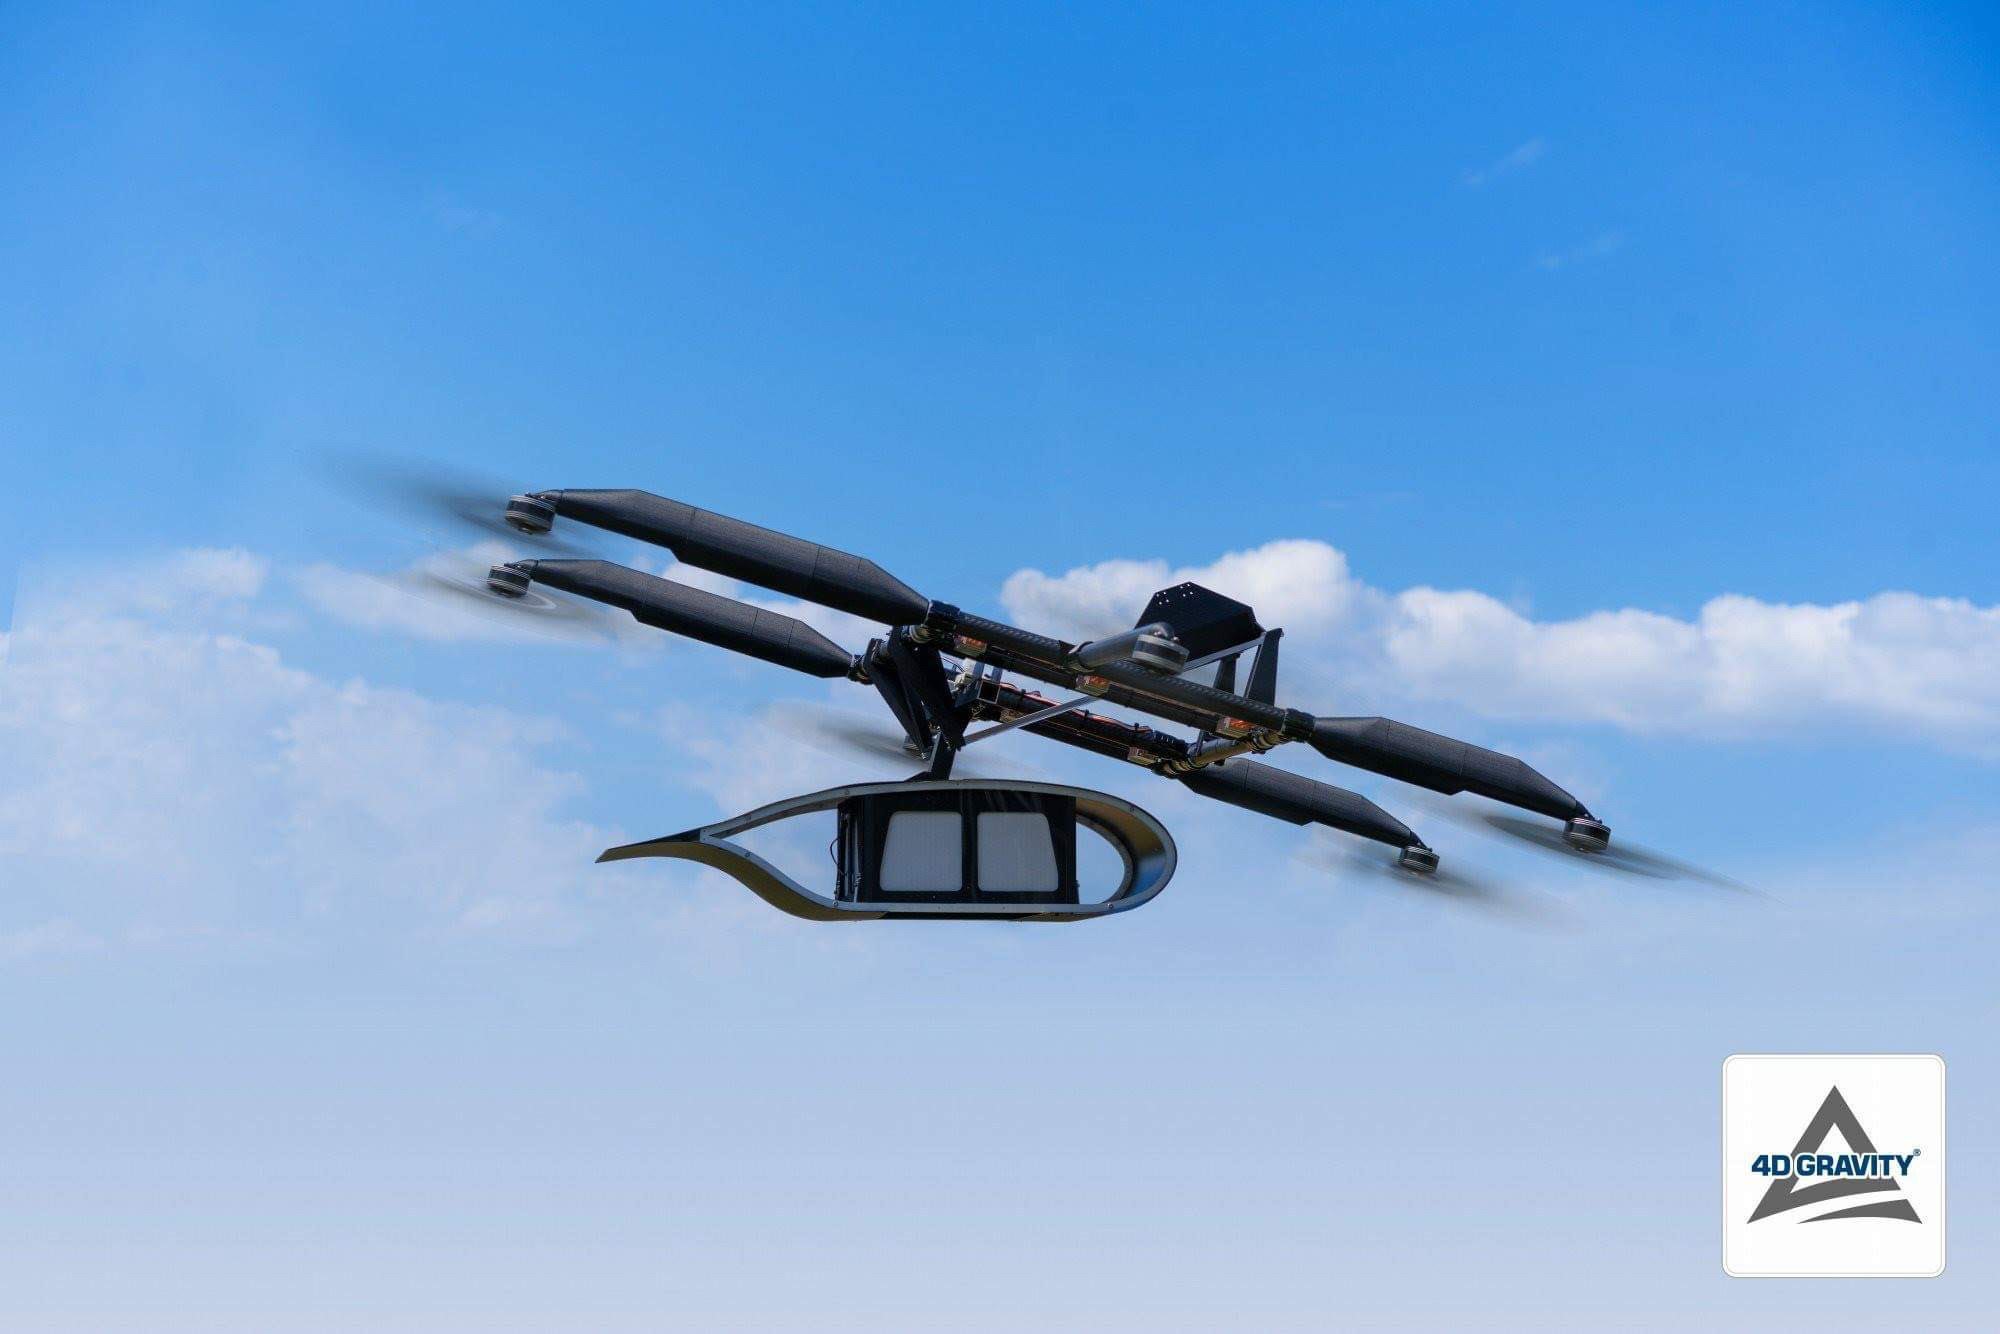 Prototype of the Next DELIVERY mass-production drone